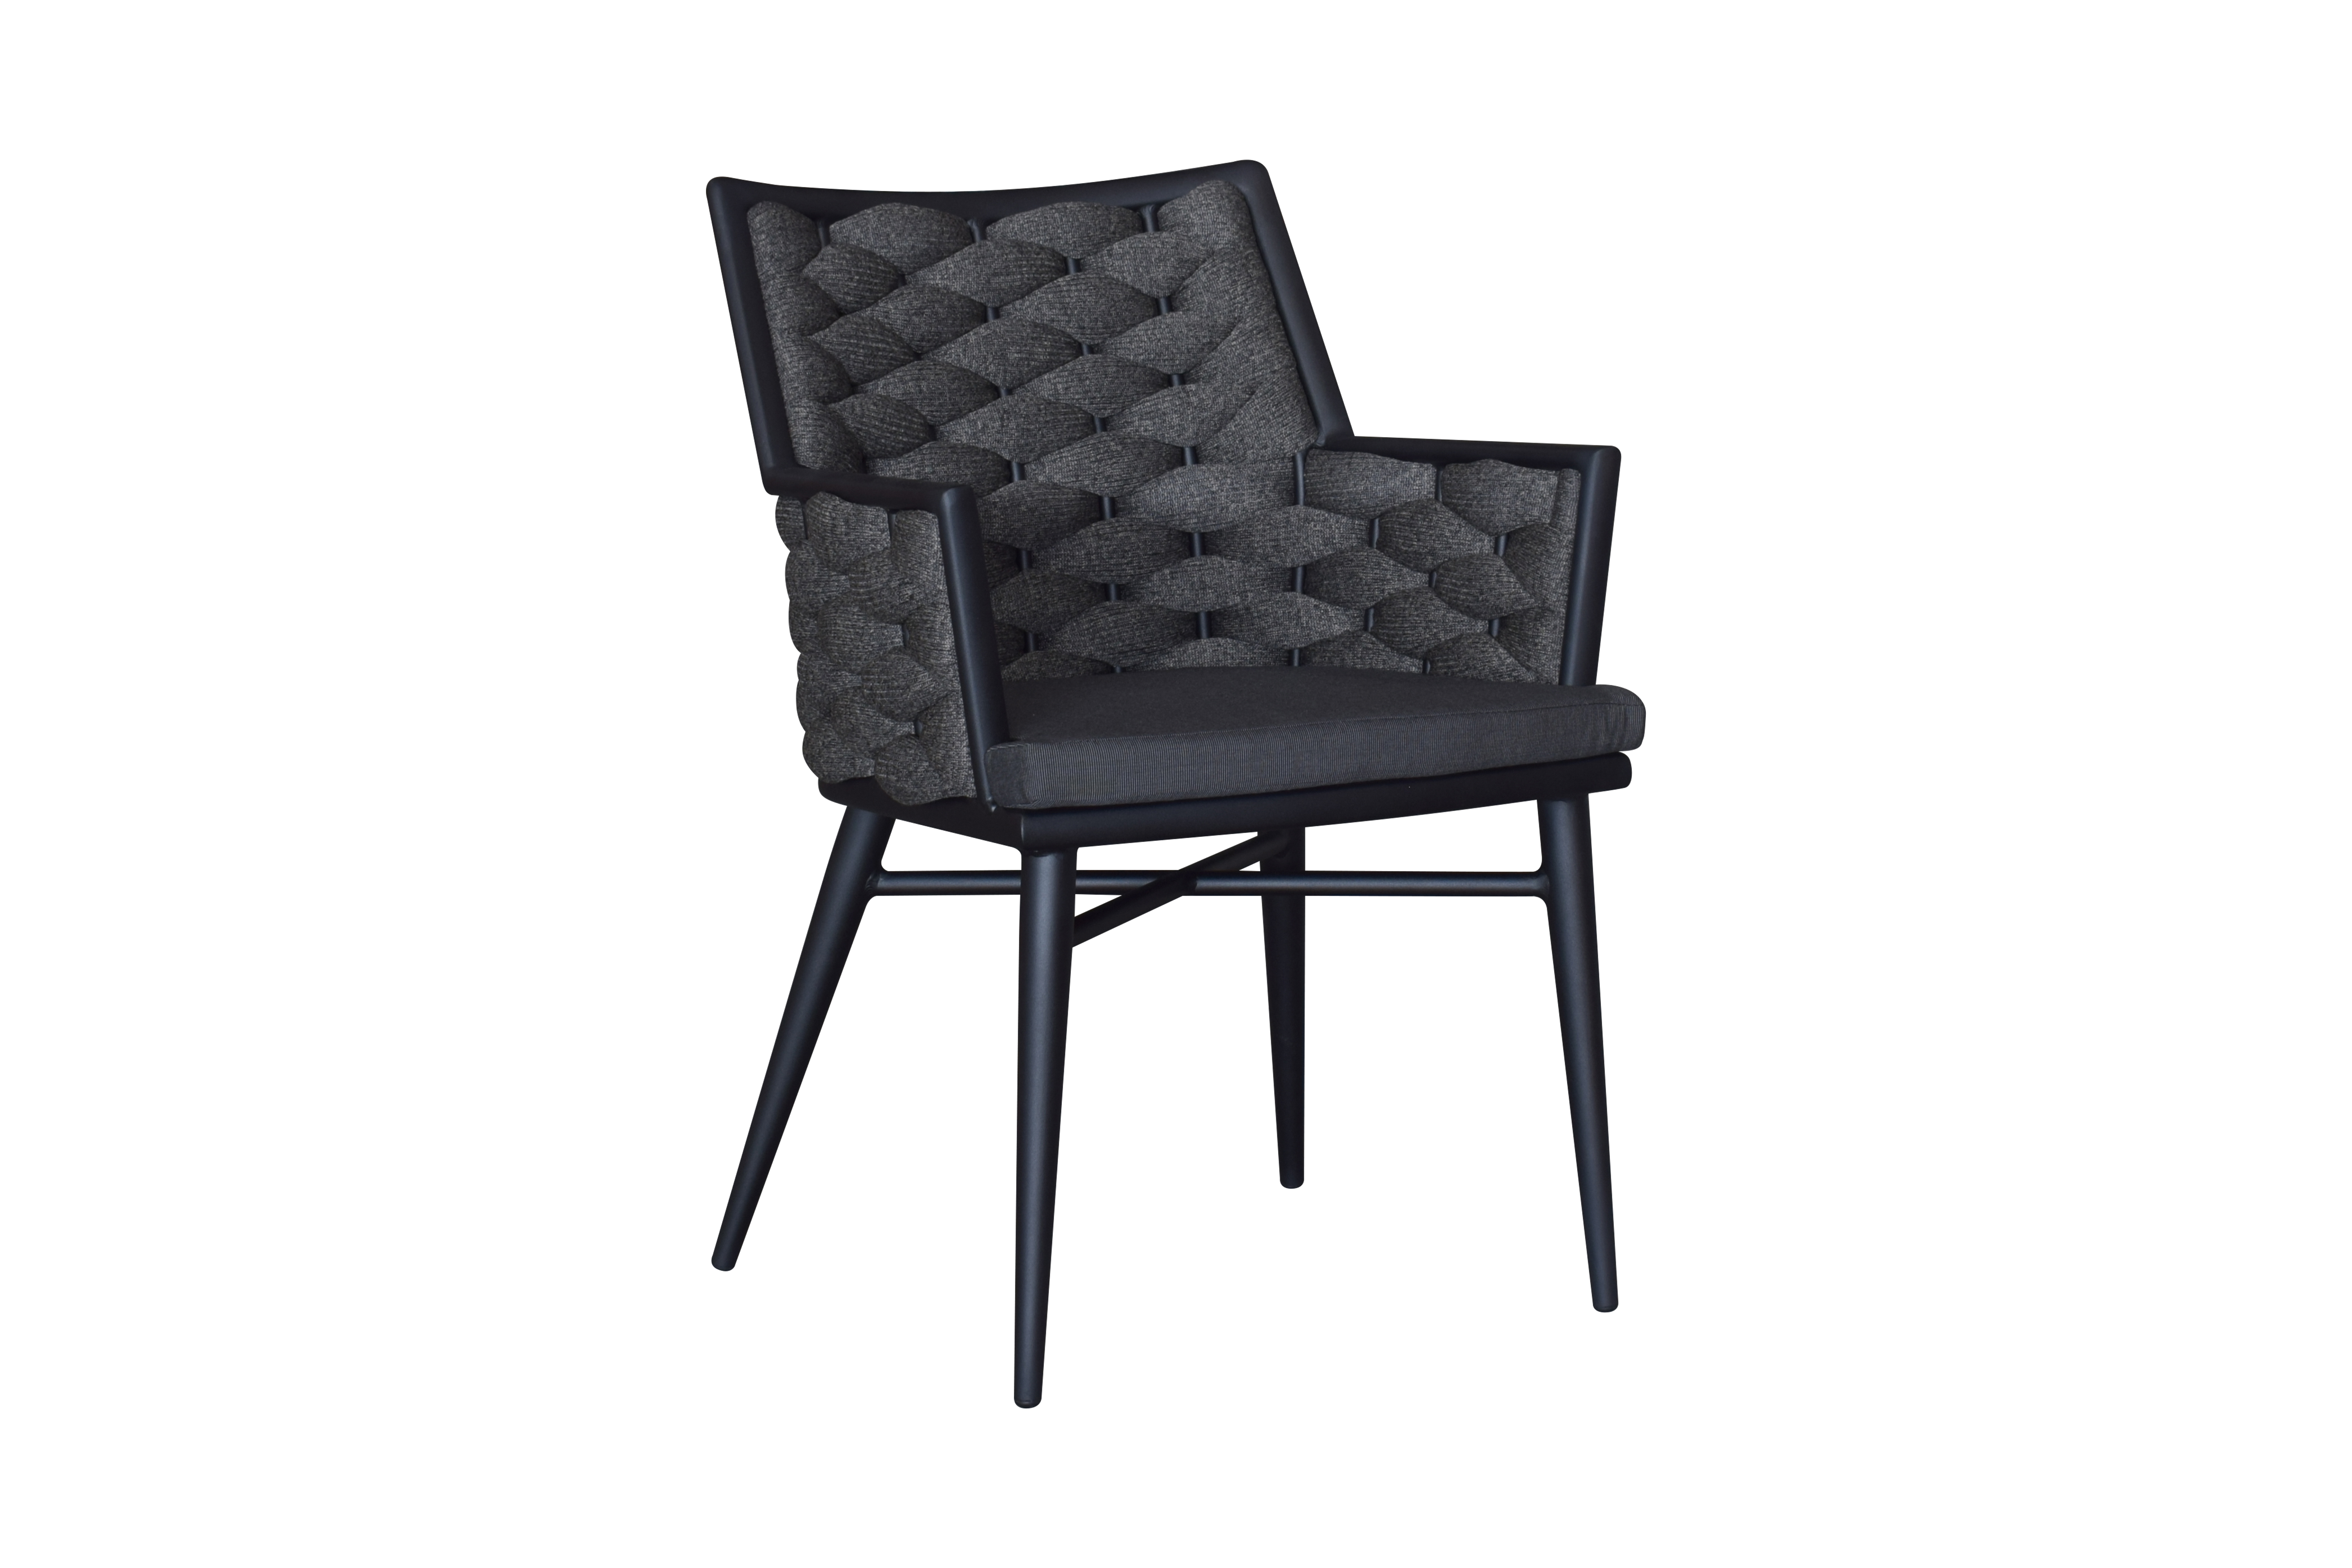 torin-outdoor-dining-chair